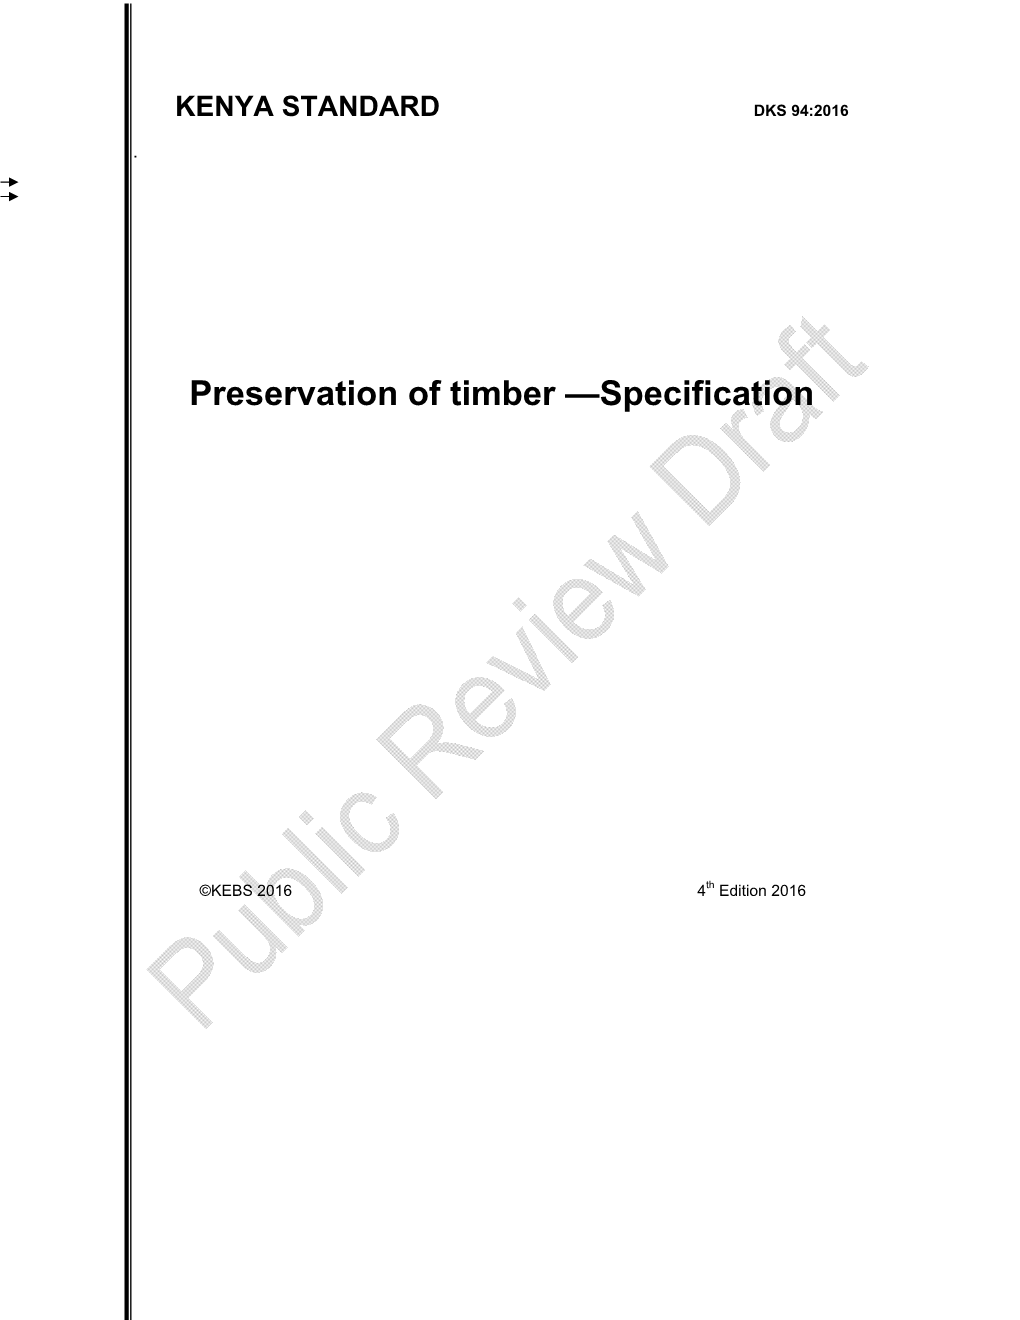 Preservation of Timber —Specification